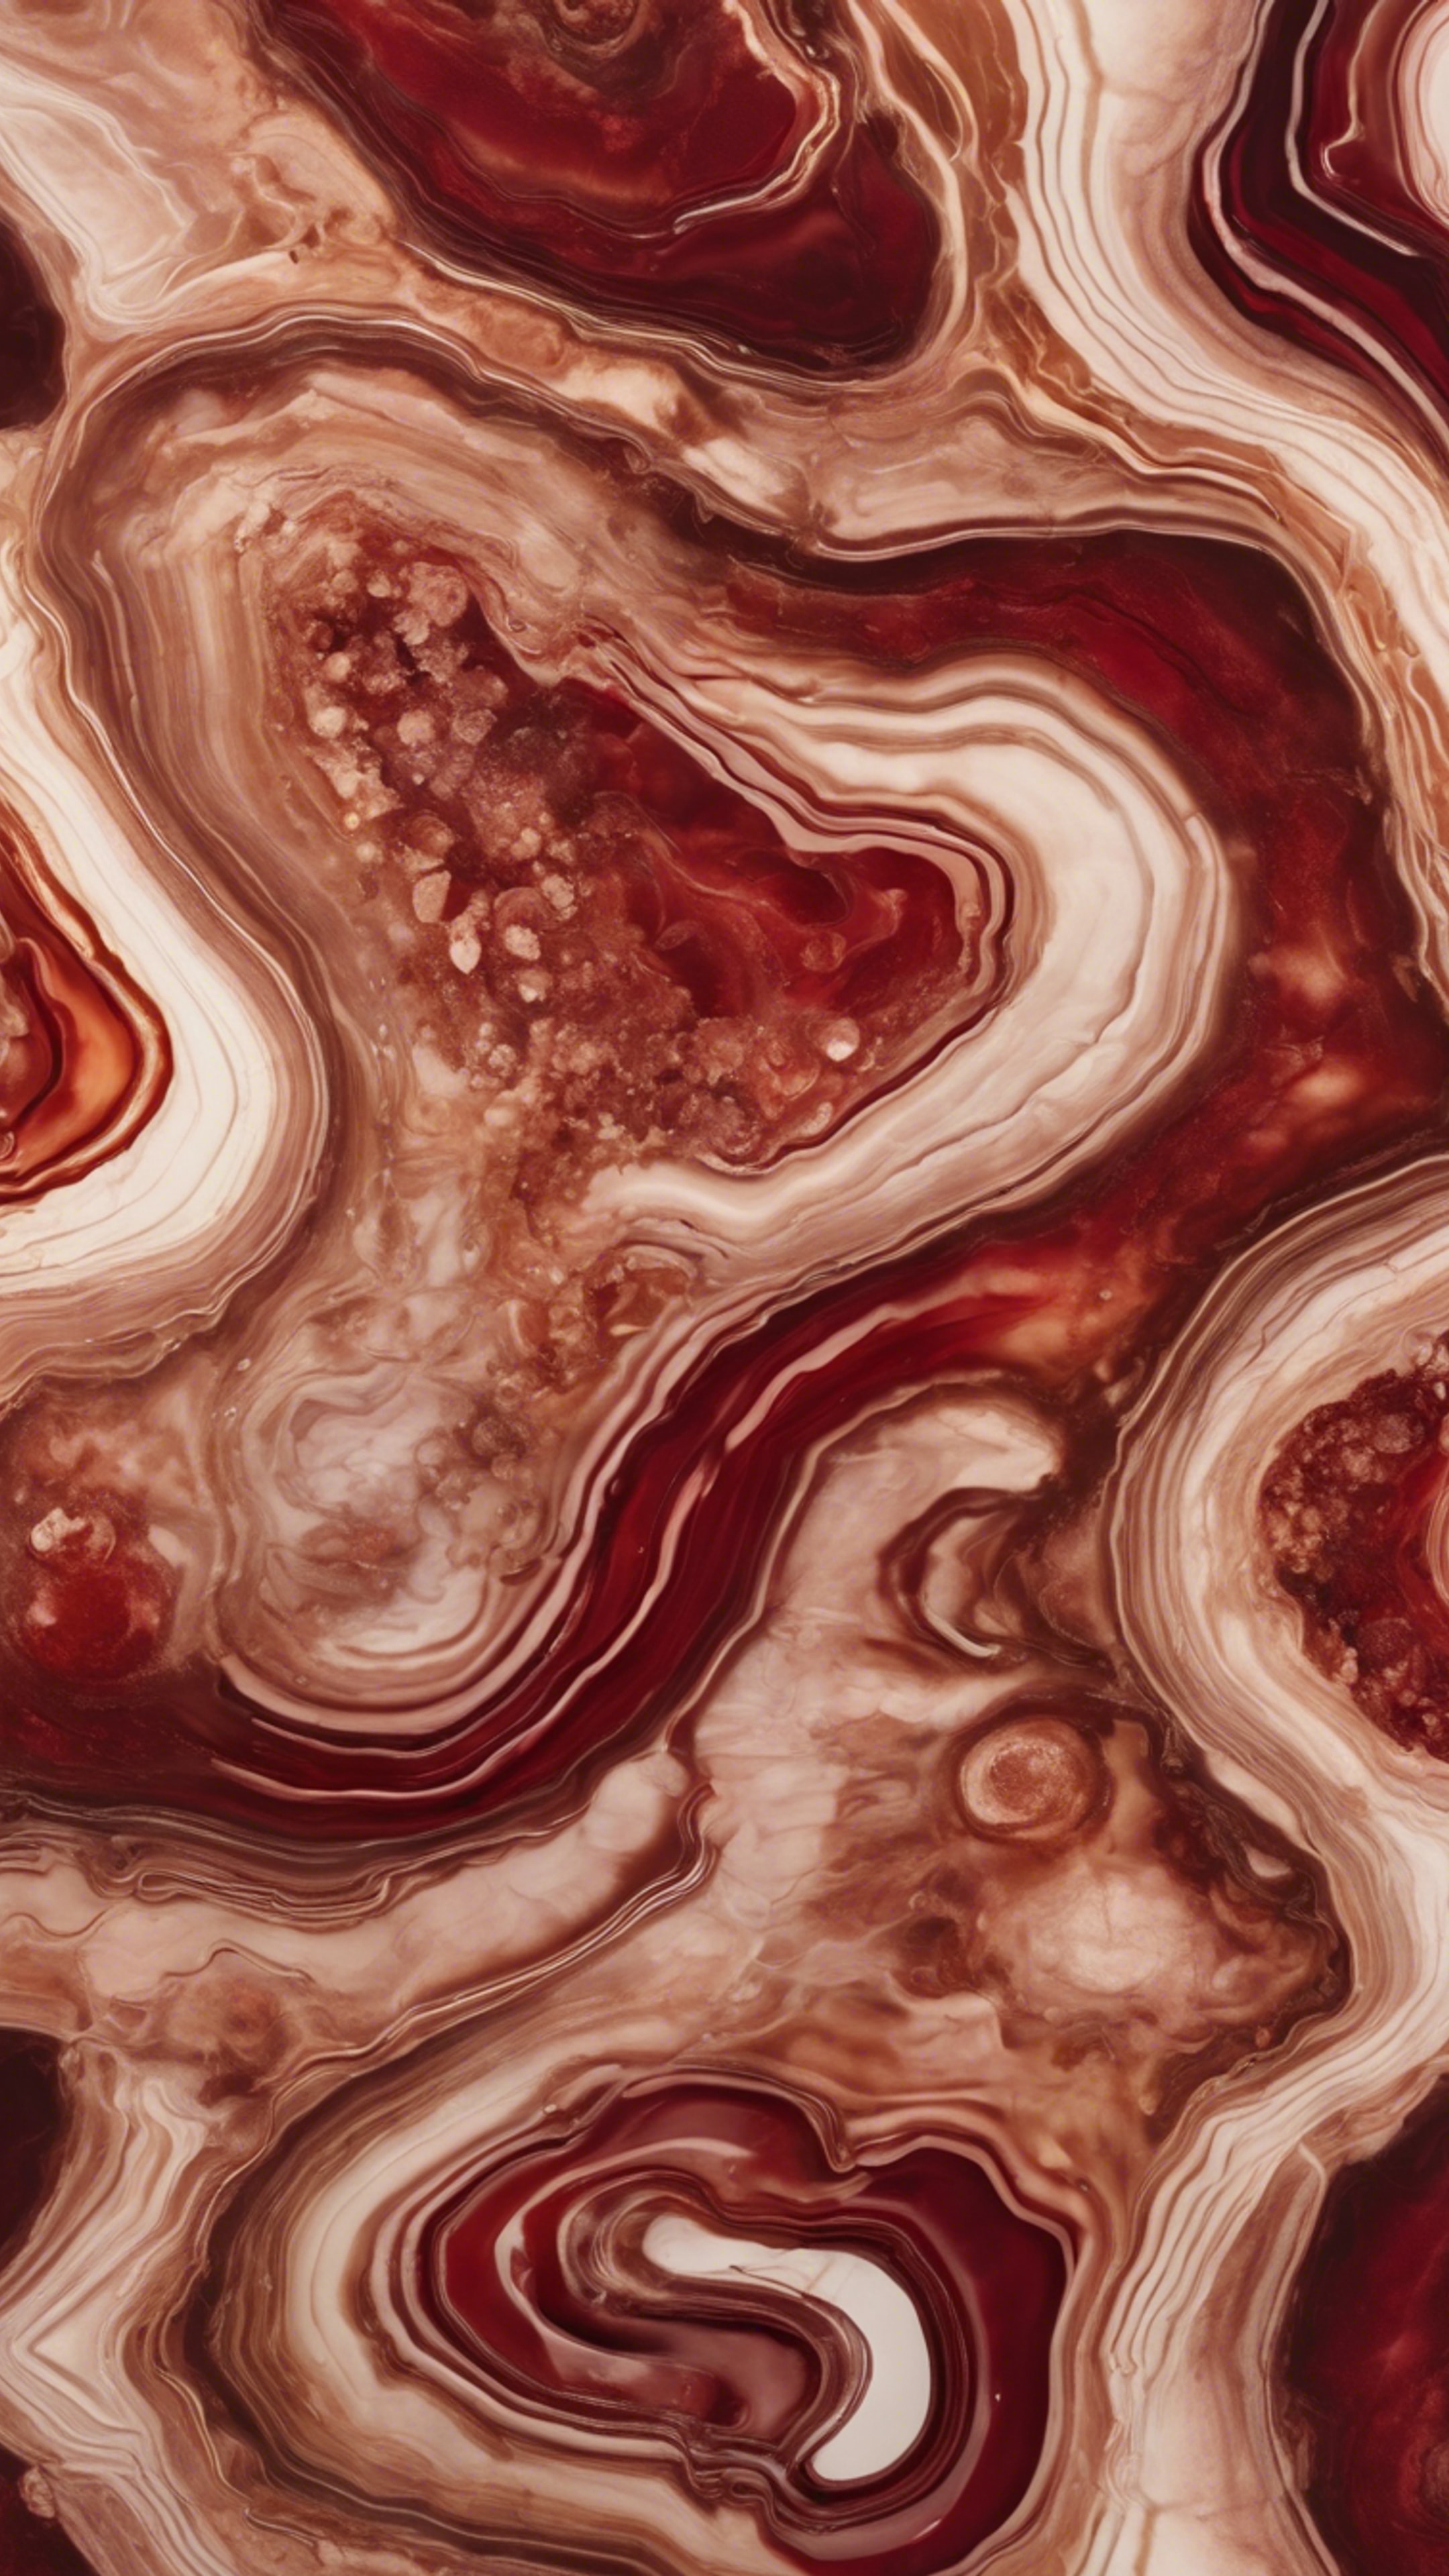 Grungy agate swirls in garnet red and sepia tones, forming a fascinating, abstract pattern. Tapeta[bb48f1c473e4473bbd4a]